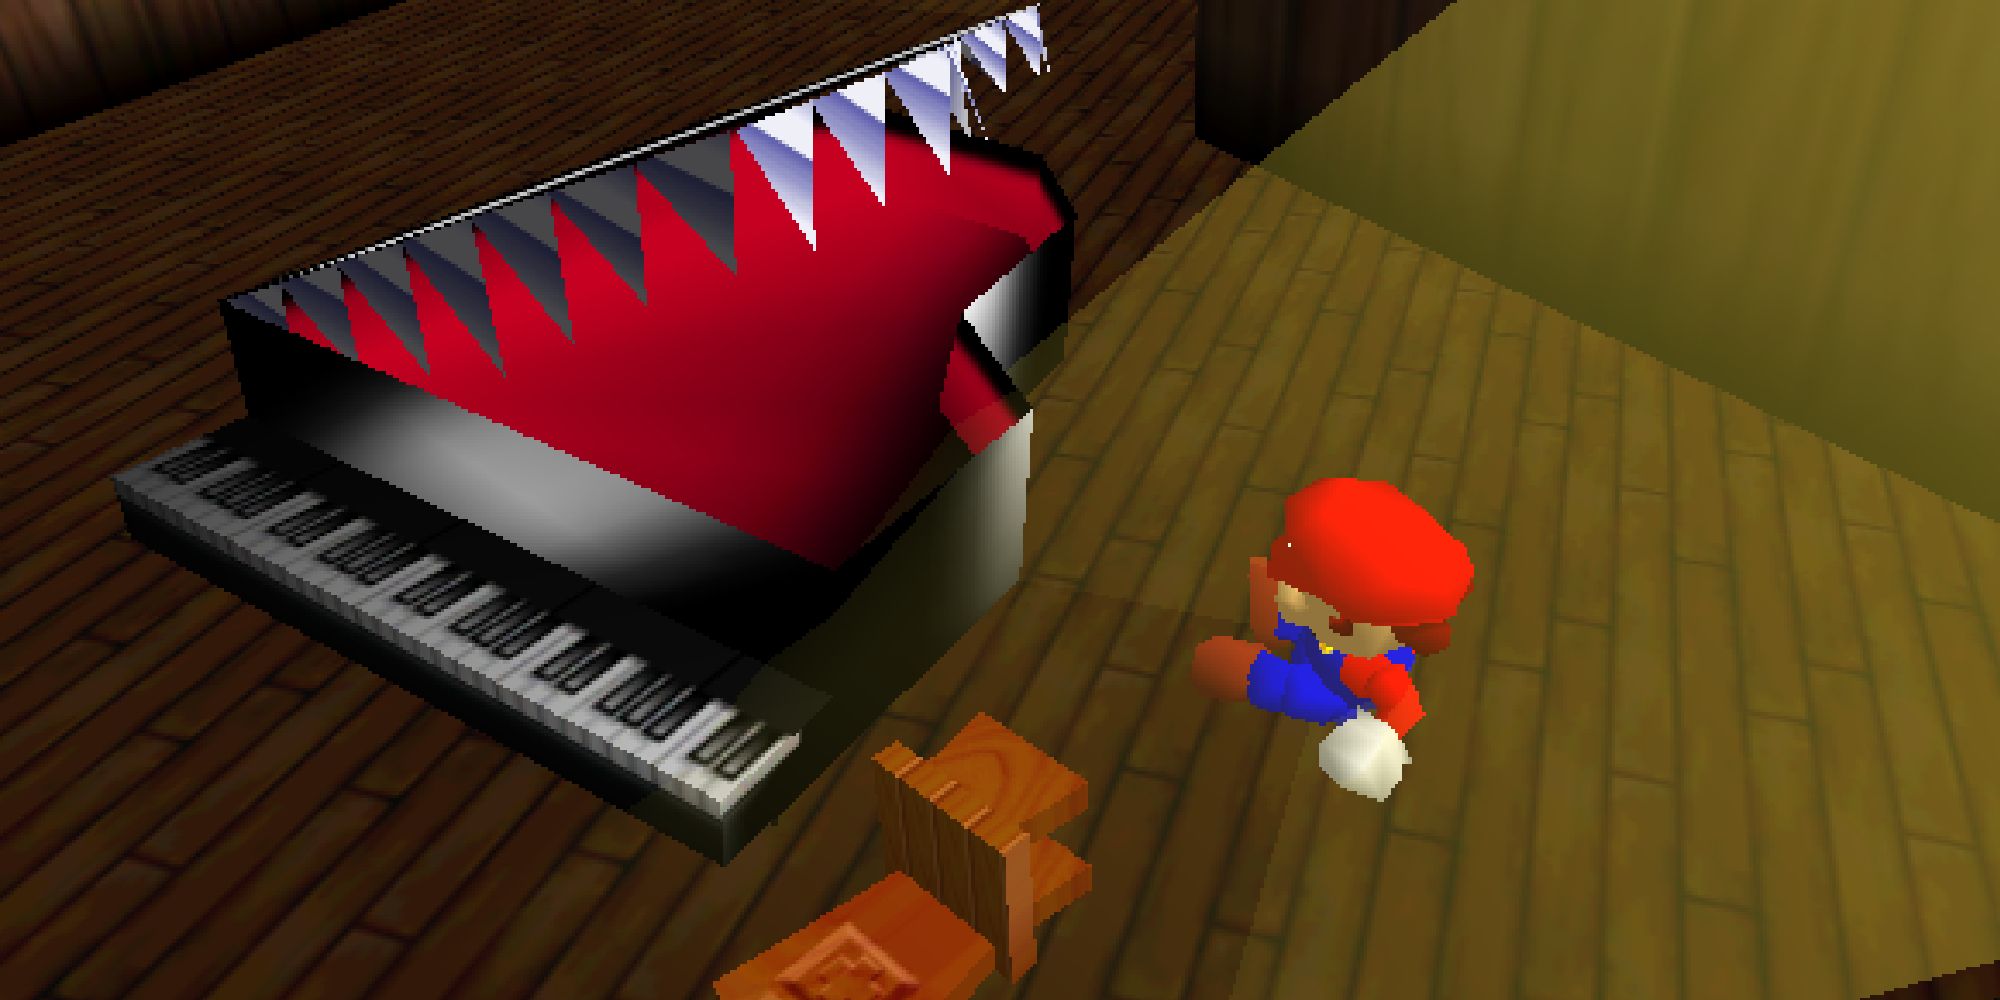 Mario being attacked by the Mad Piano in Boo's Big Haunt